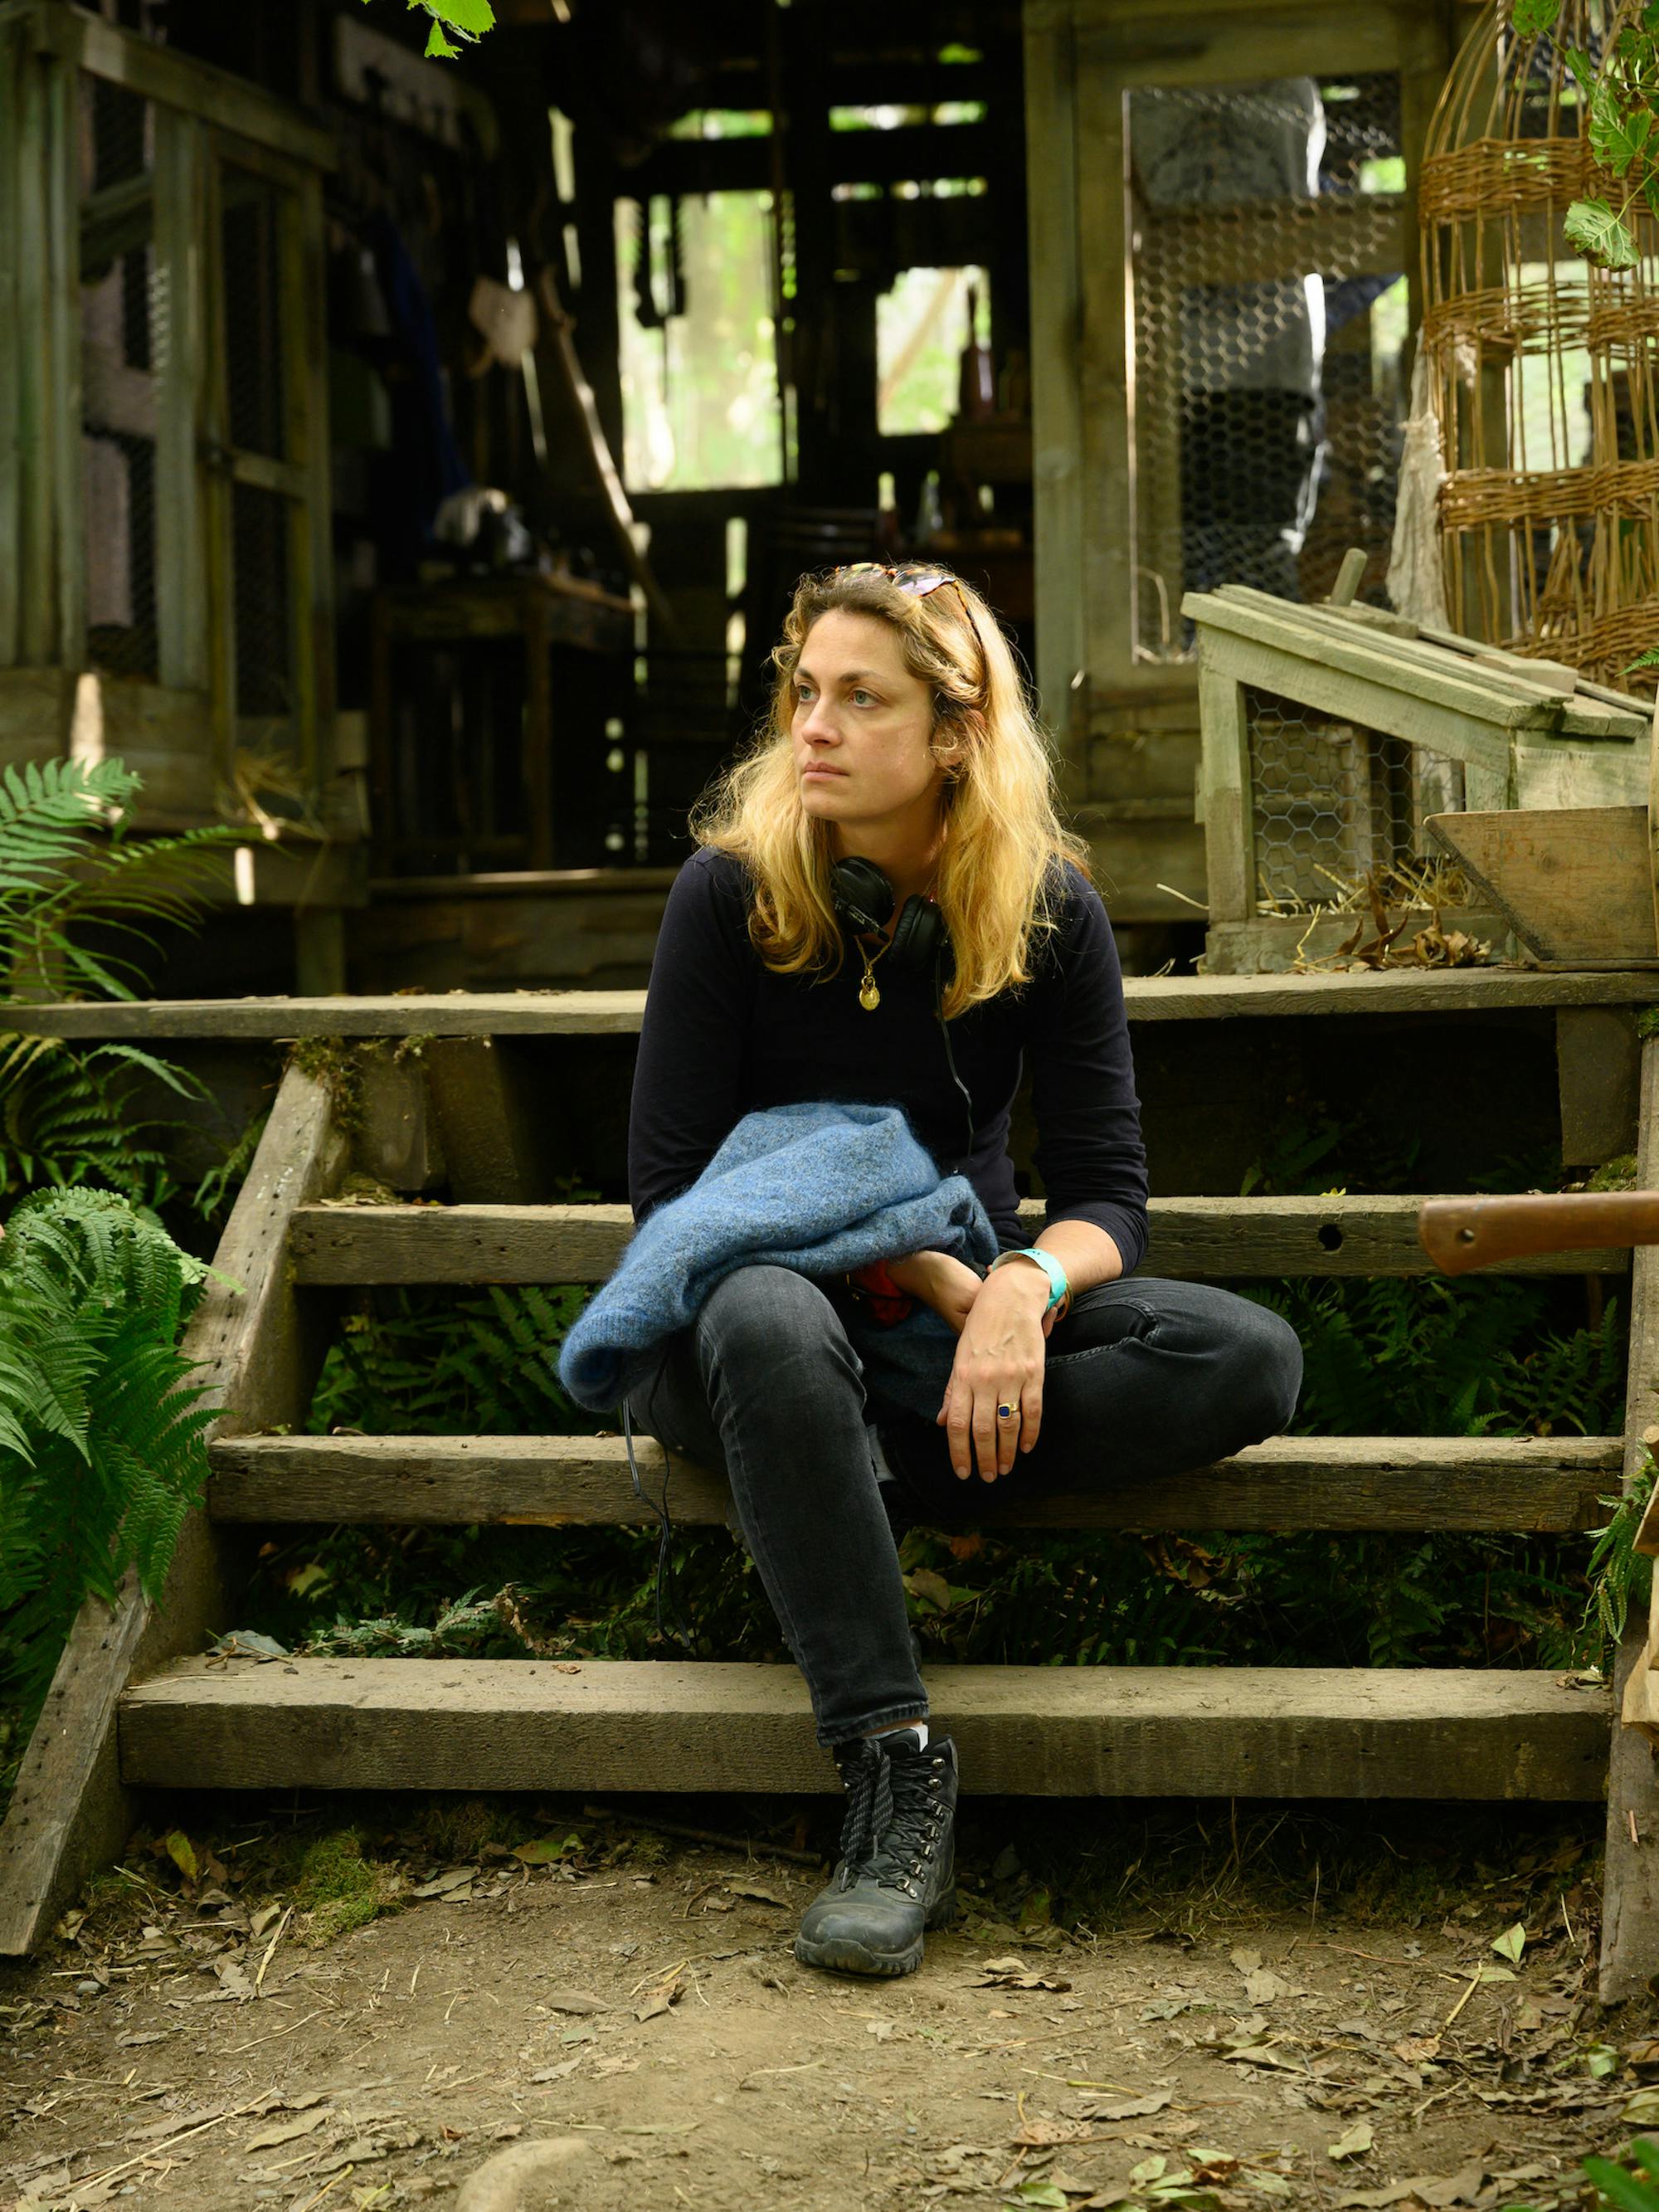 Laure de Clermont-Tonnerre wears a black top and black jeans, and sits on some wooden steps.